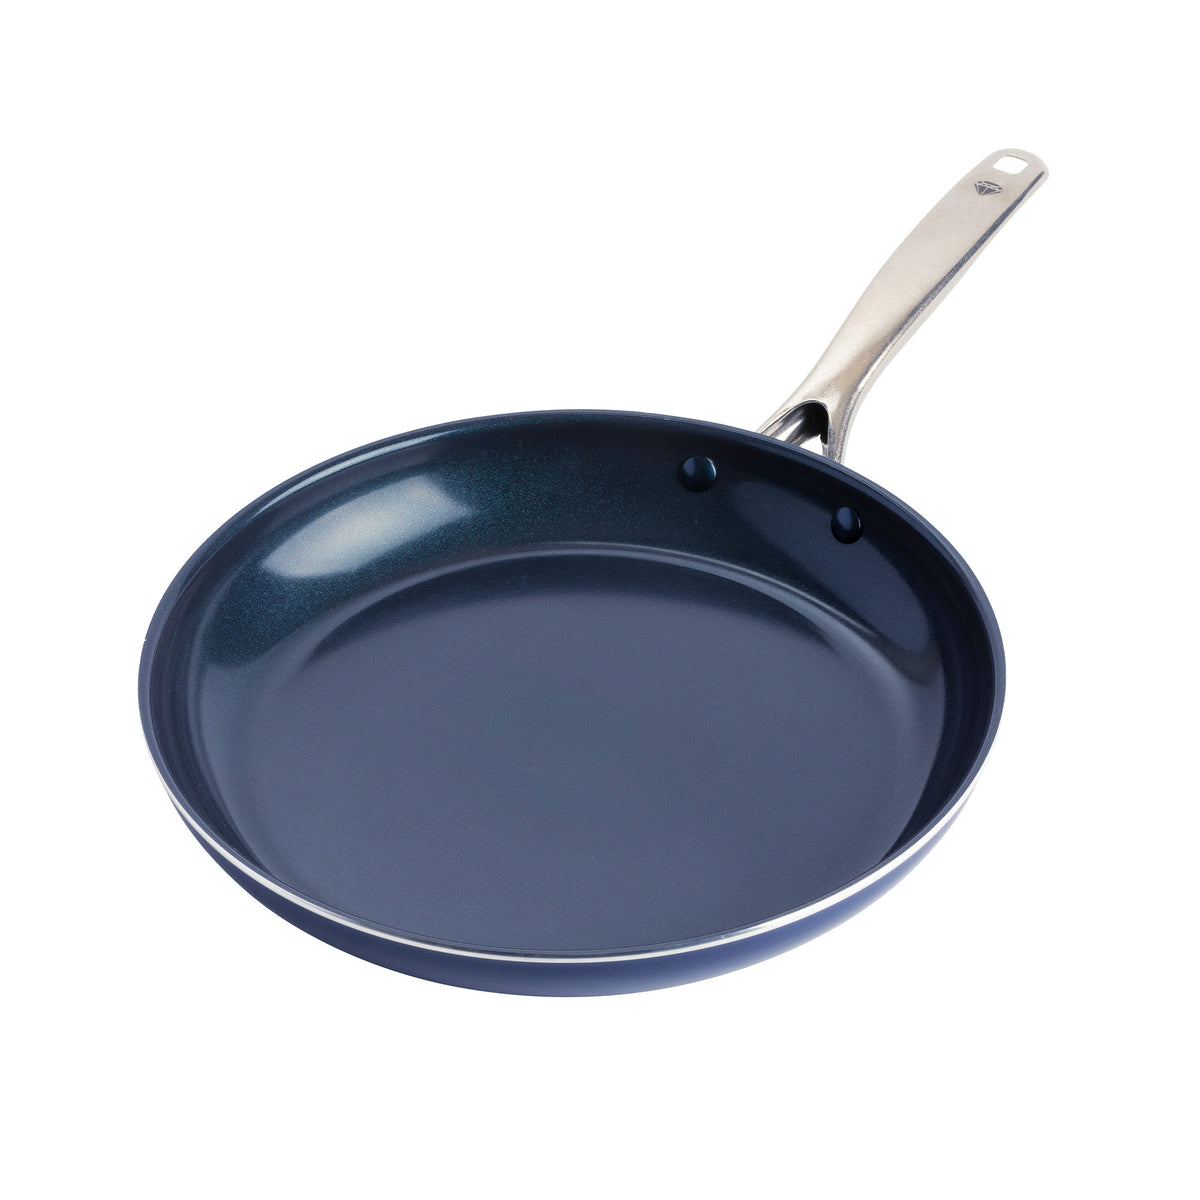 Honenix Non stick healthy stainless steel infused ceramic, 7.9